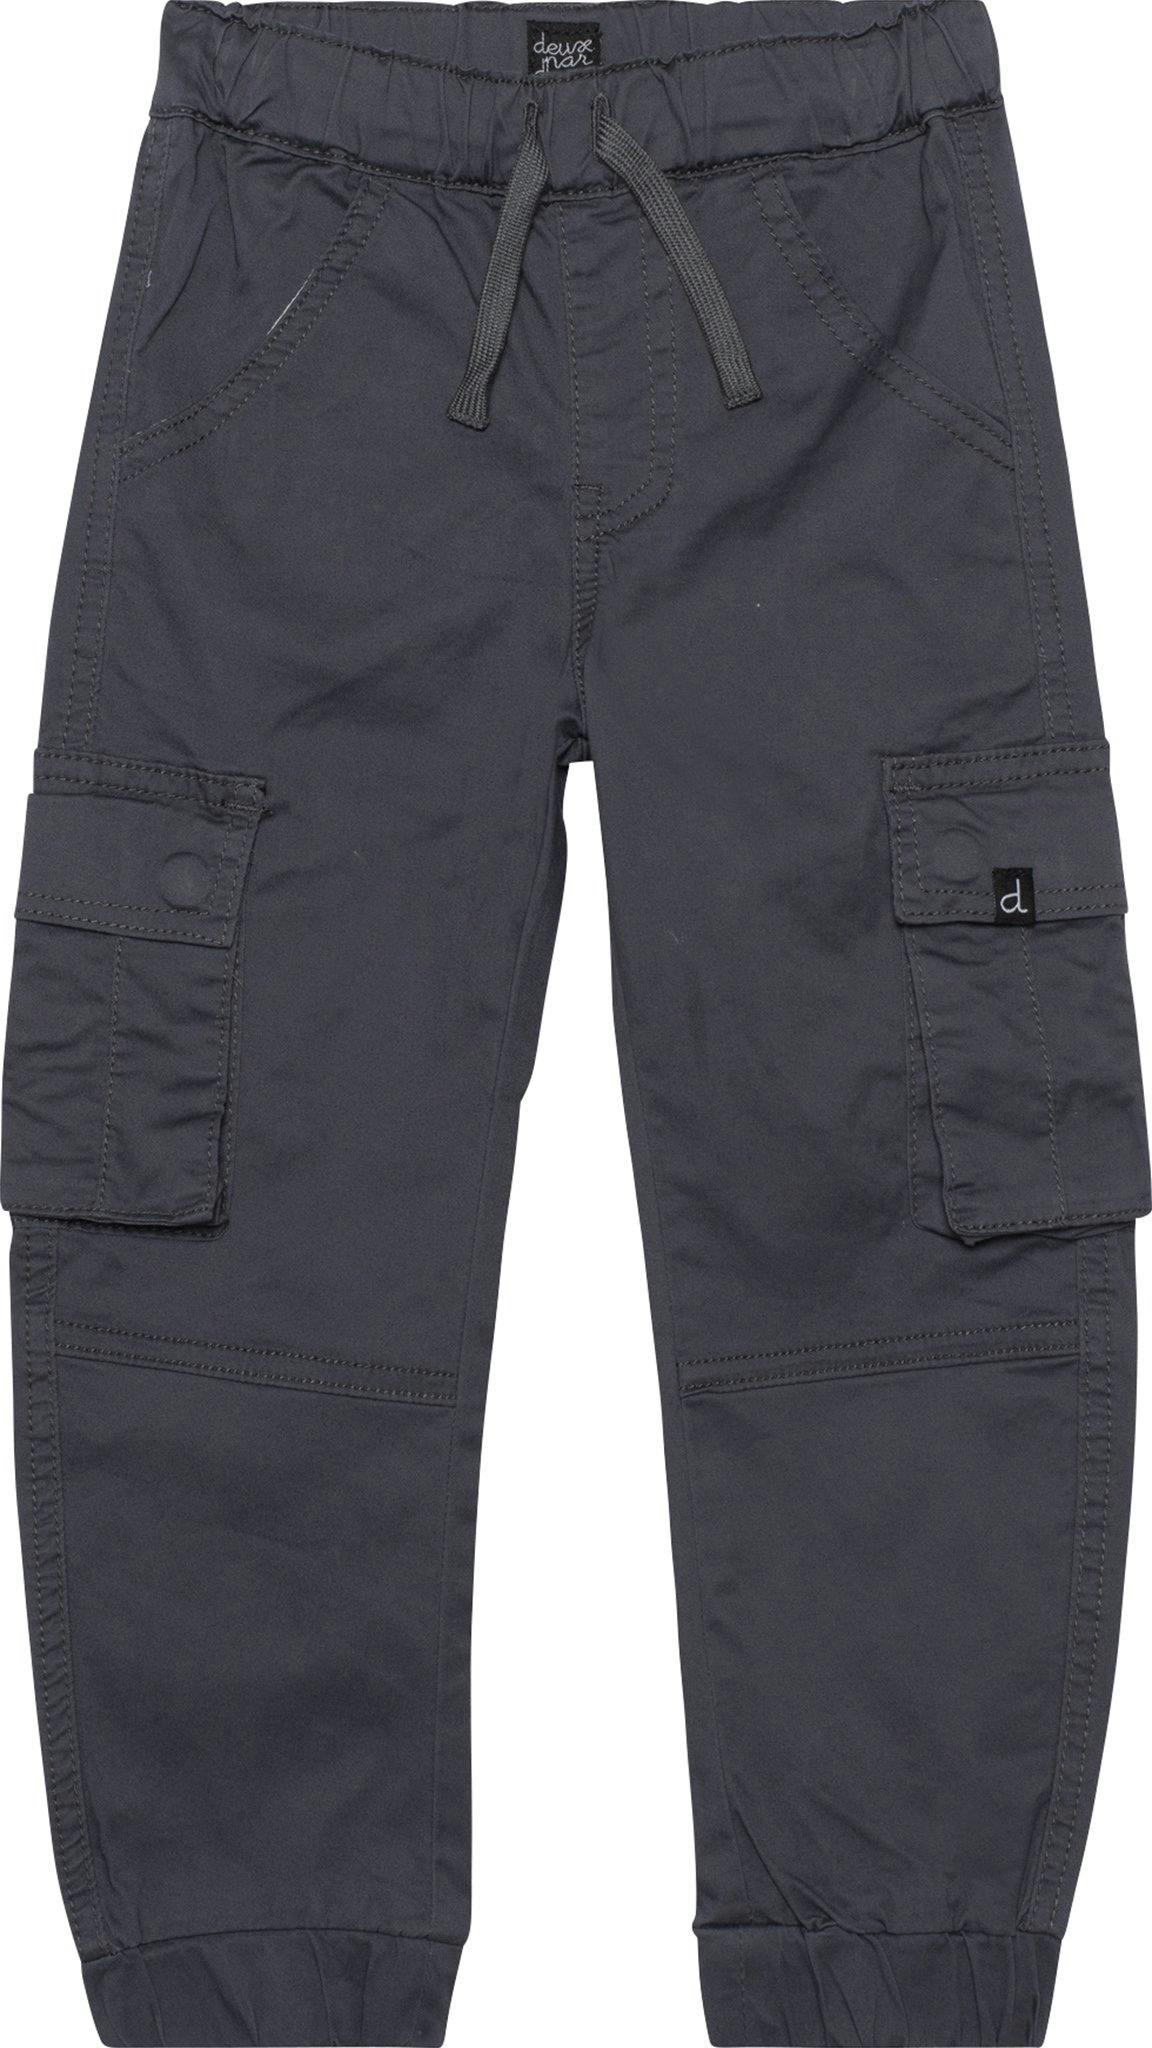 Product image for Twill Cargo Jogger Pants - Big Boys